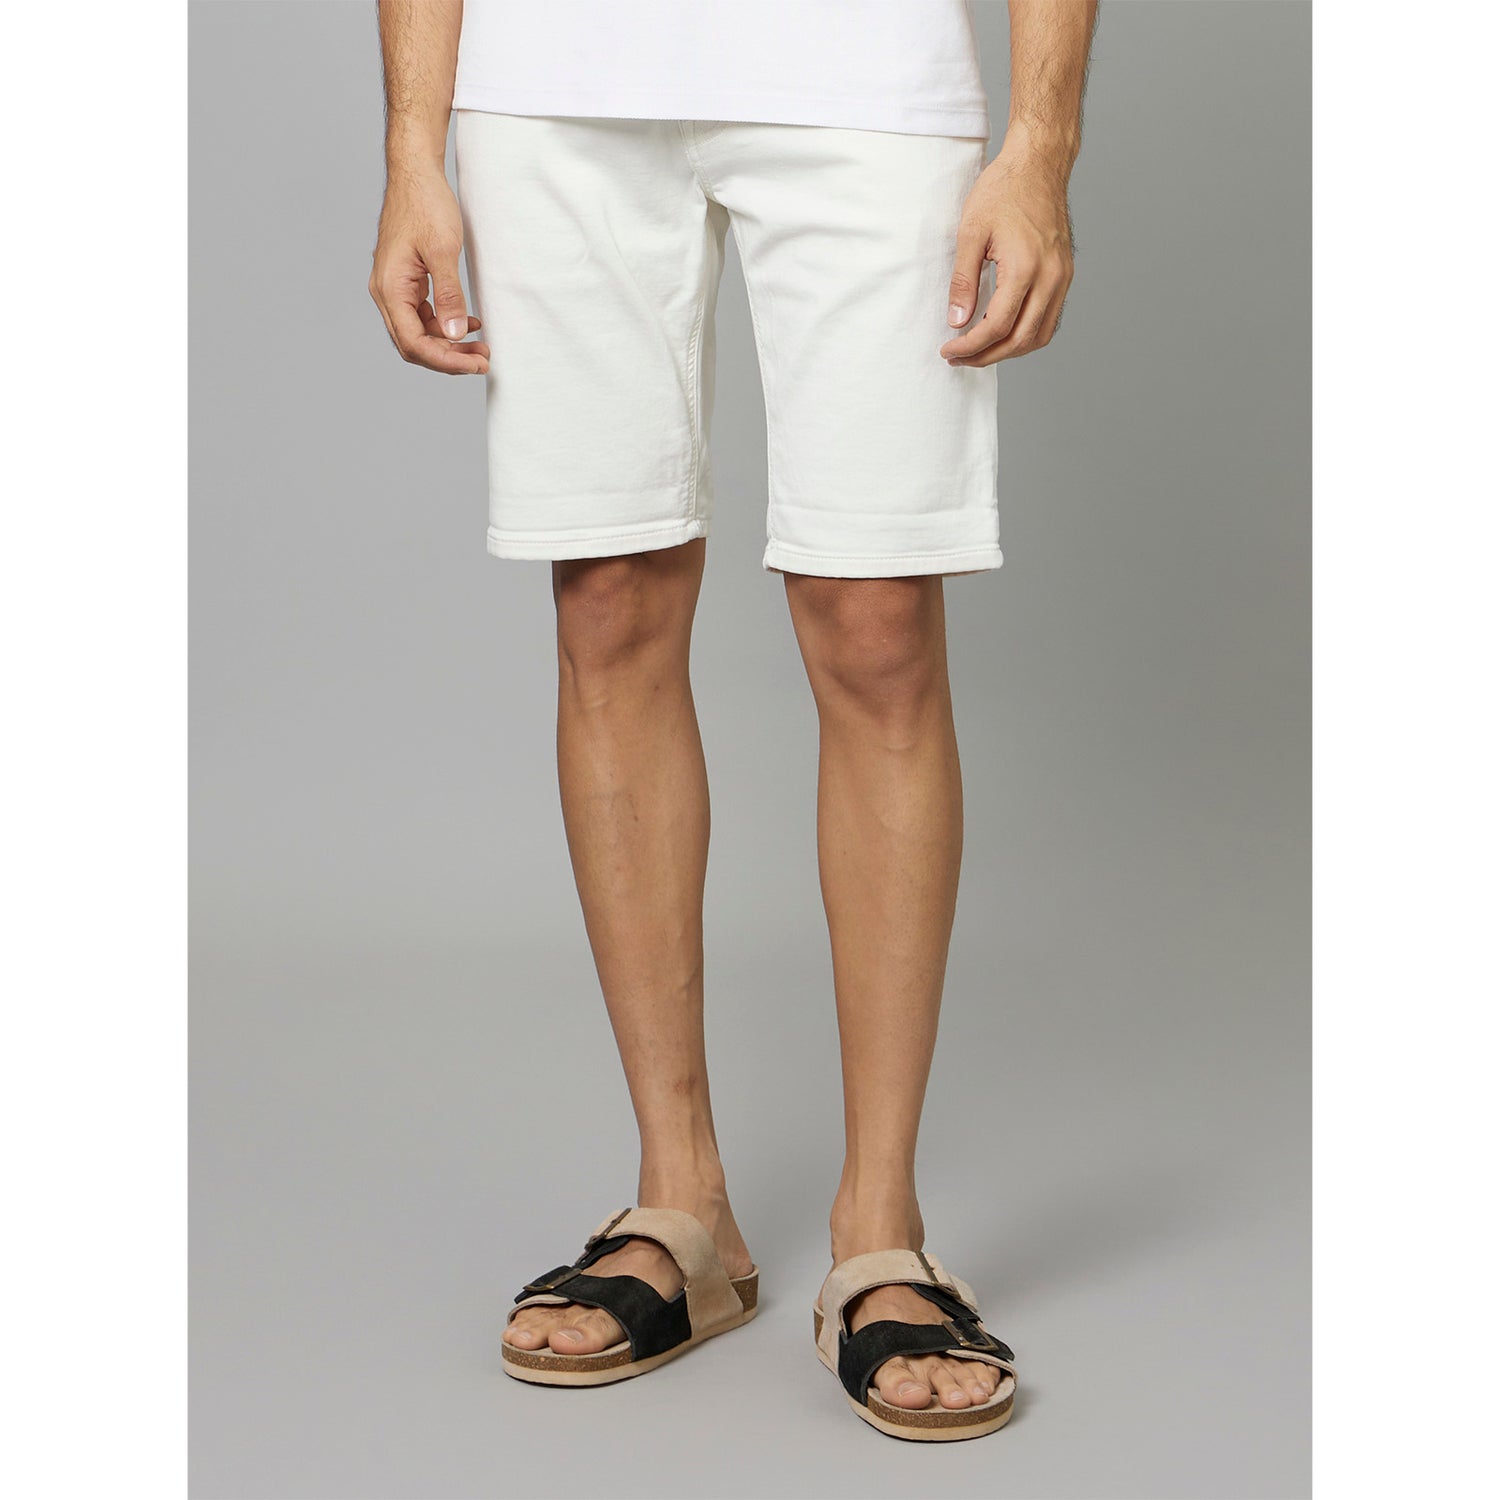 Solid Off White Cotton Shorts (Various Sizes)